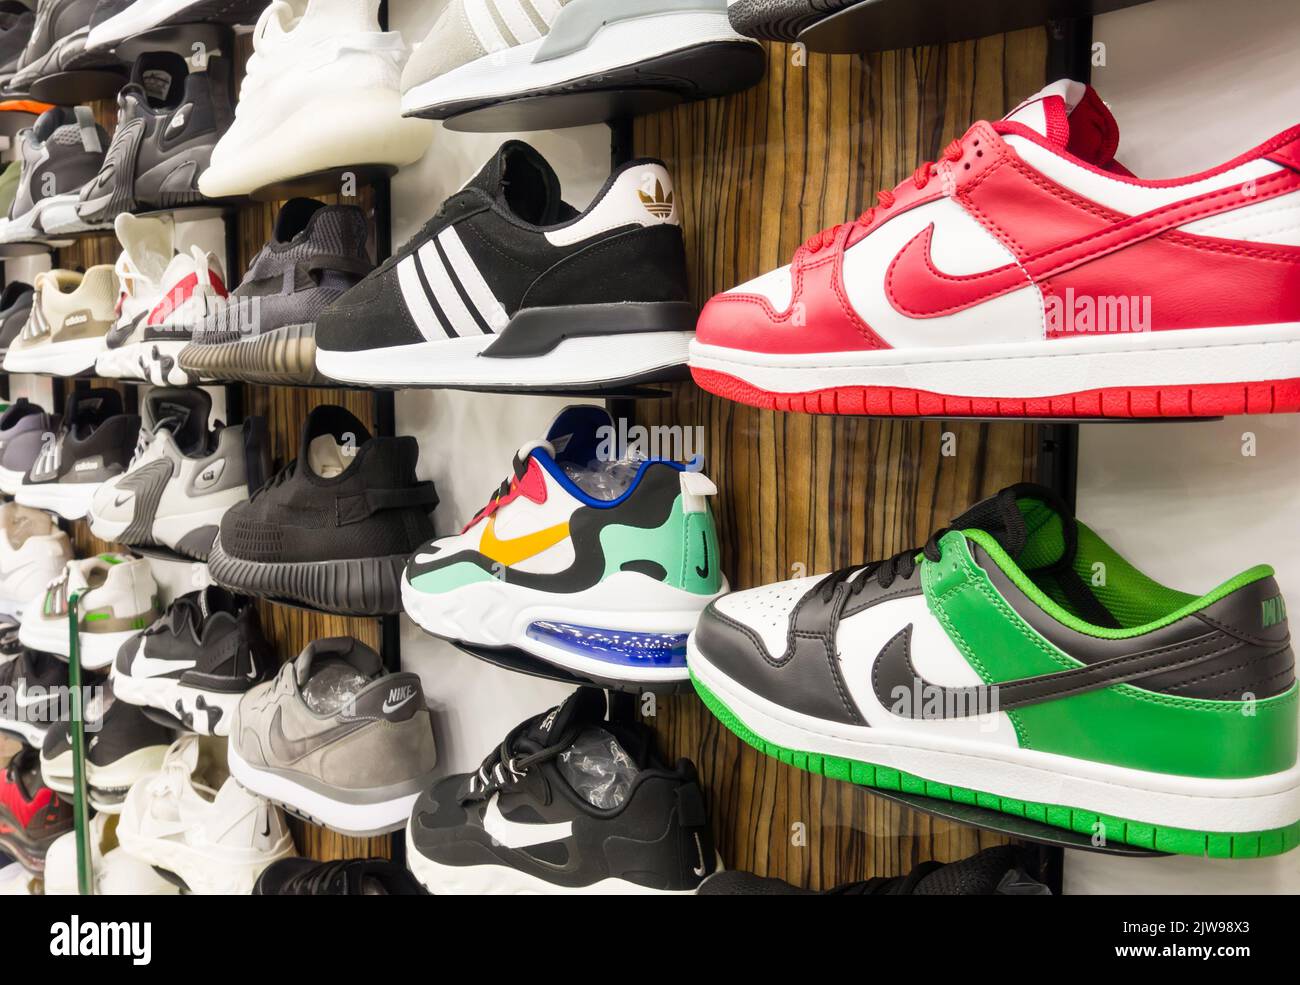 Berlin, Germany - March 12, 2022: Different brand shoes in a retail shop. Stock Photo